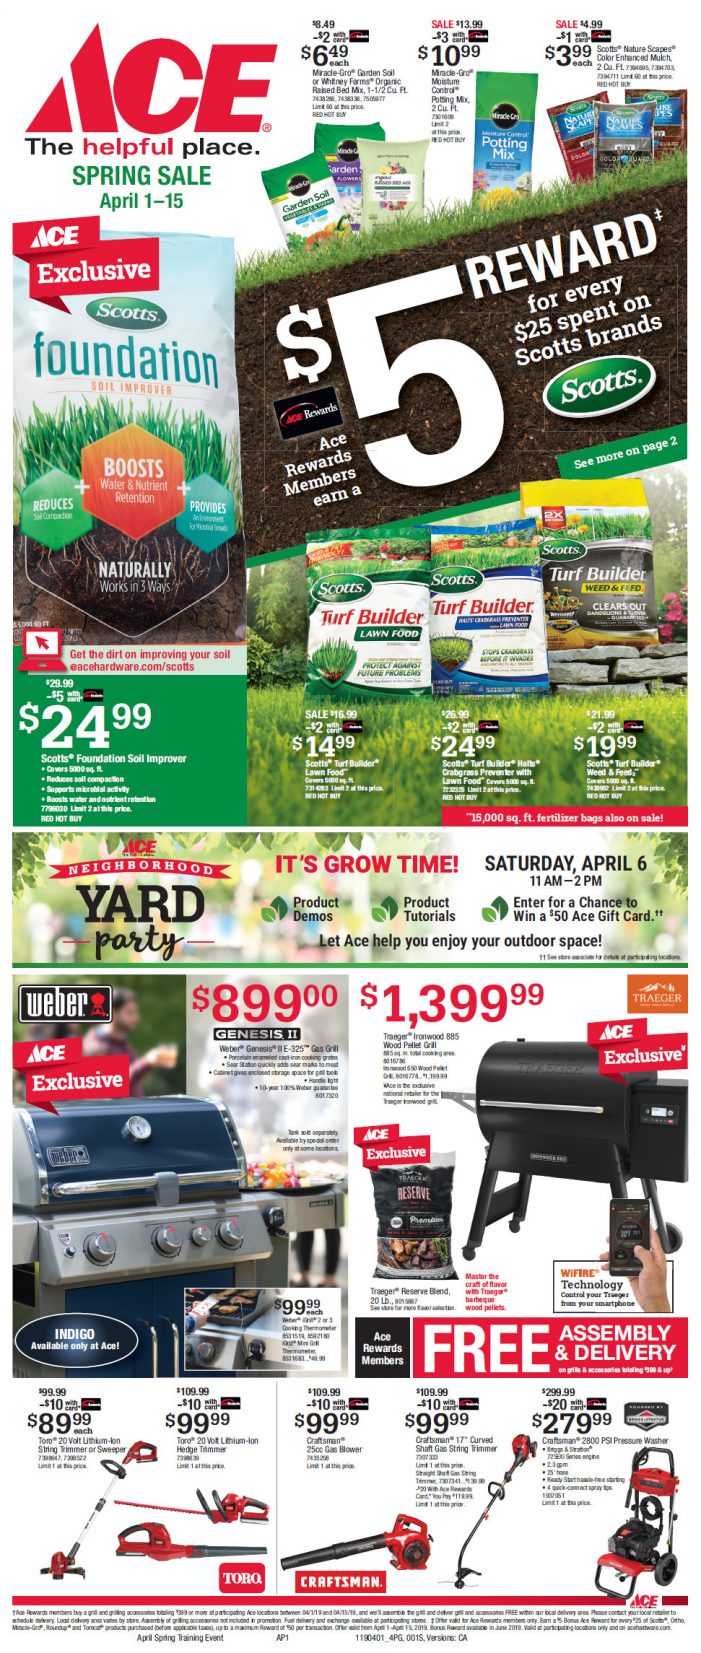 Arnold Ace Home Center Spring Sale Going on Now!